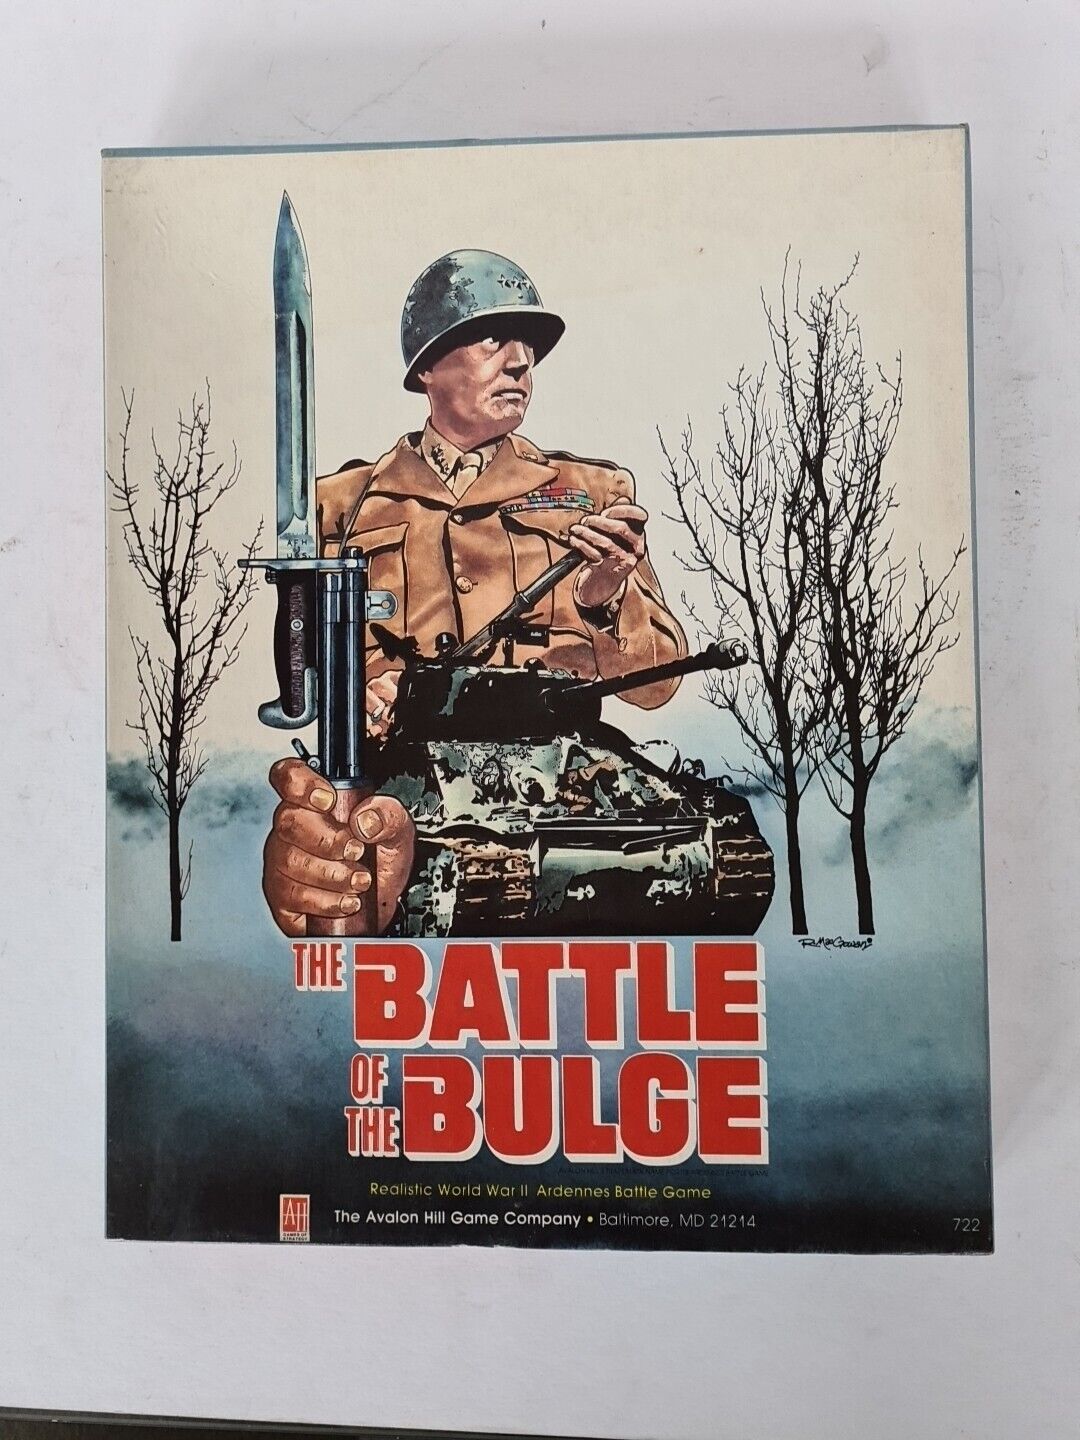 Vintage advertisement poster for "The Battle of the Bulge" board game, depicting a military figure in uniform holding a bayonet against a background with a tank and barren trees.